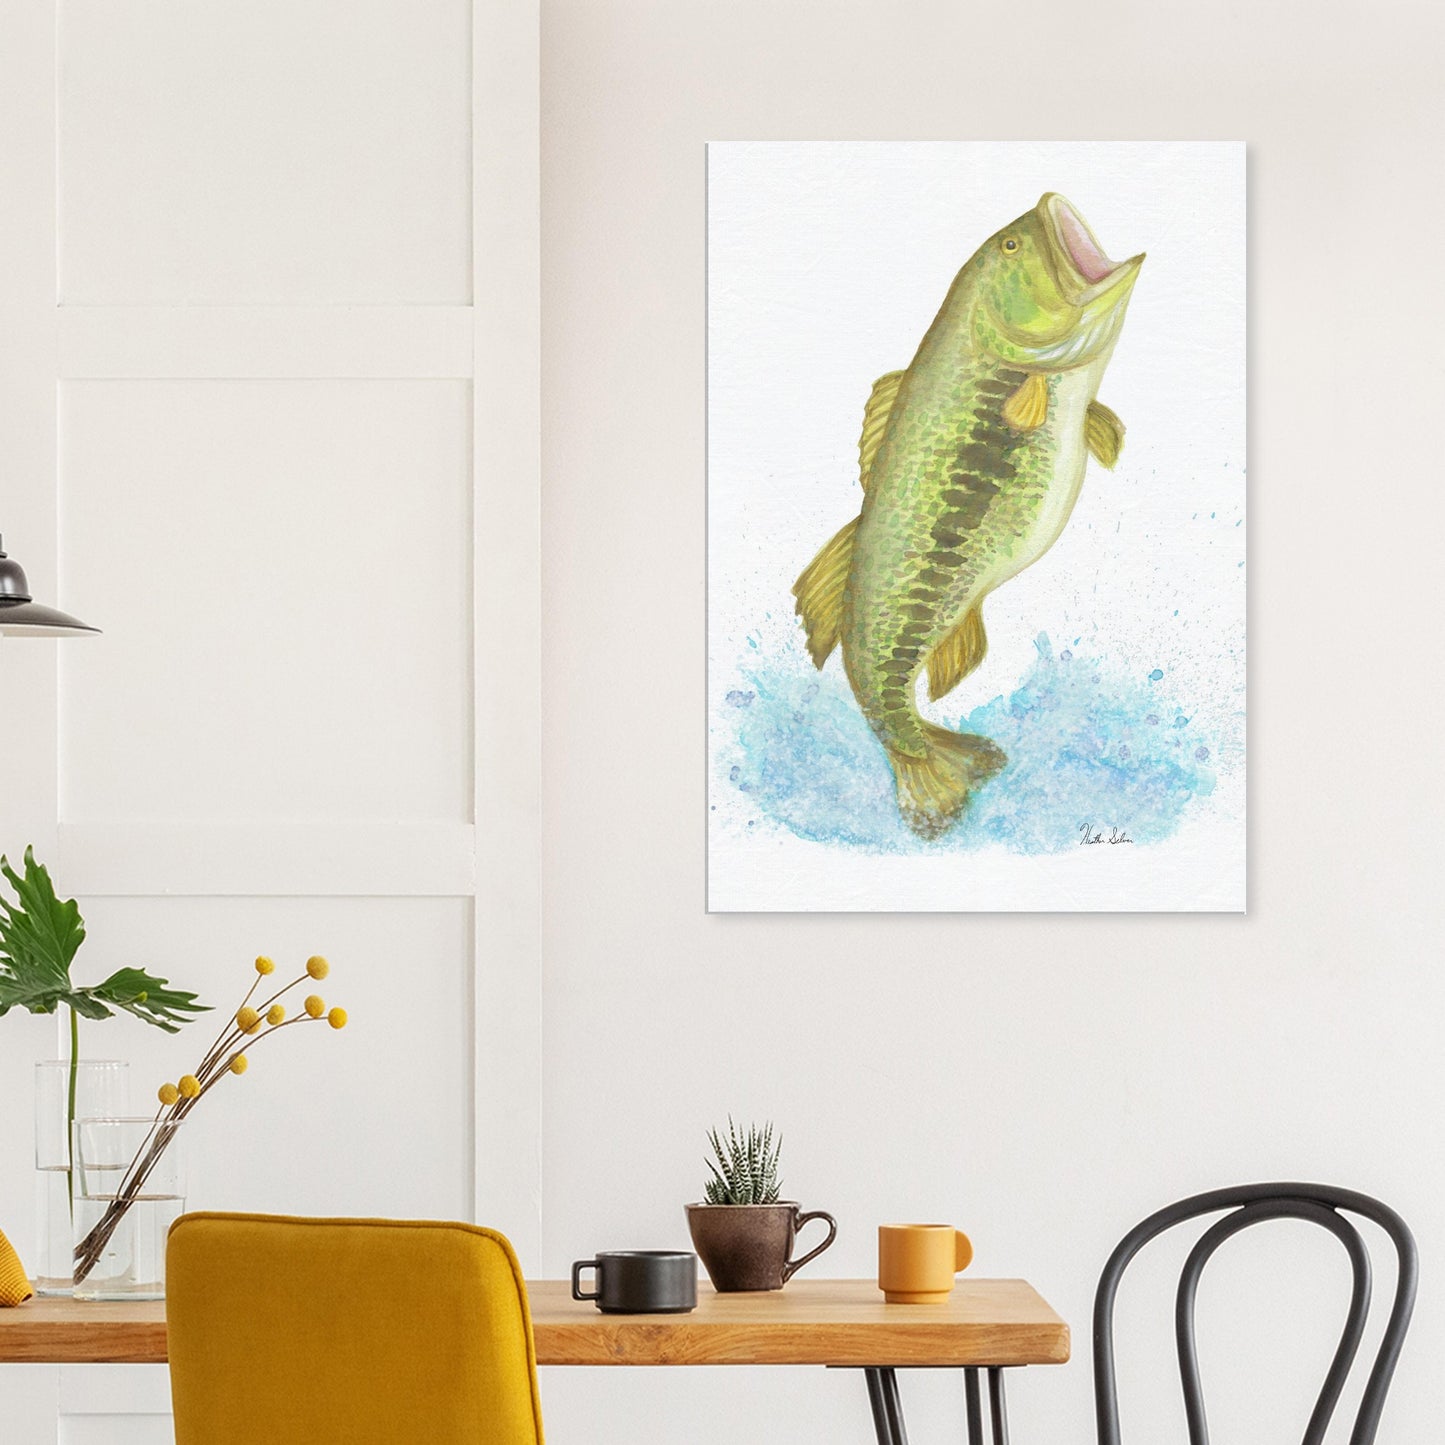 28 by 40 inch slim canvas wall art print featuring a watercolor painting of a largemouth bass leaping from the water. Shown on wall above wooden table and kitchen chairs.